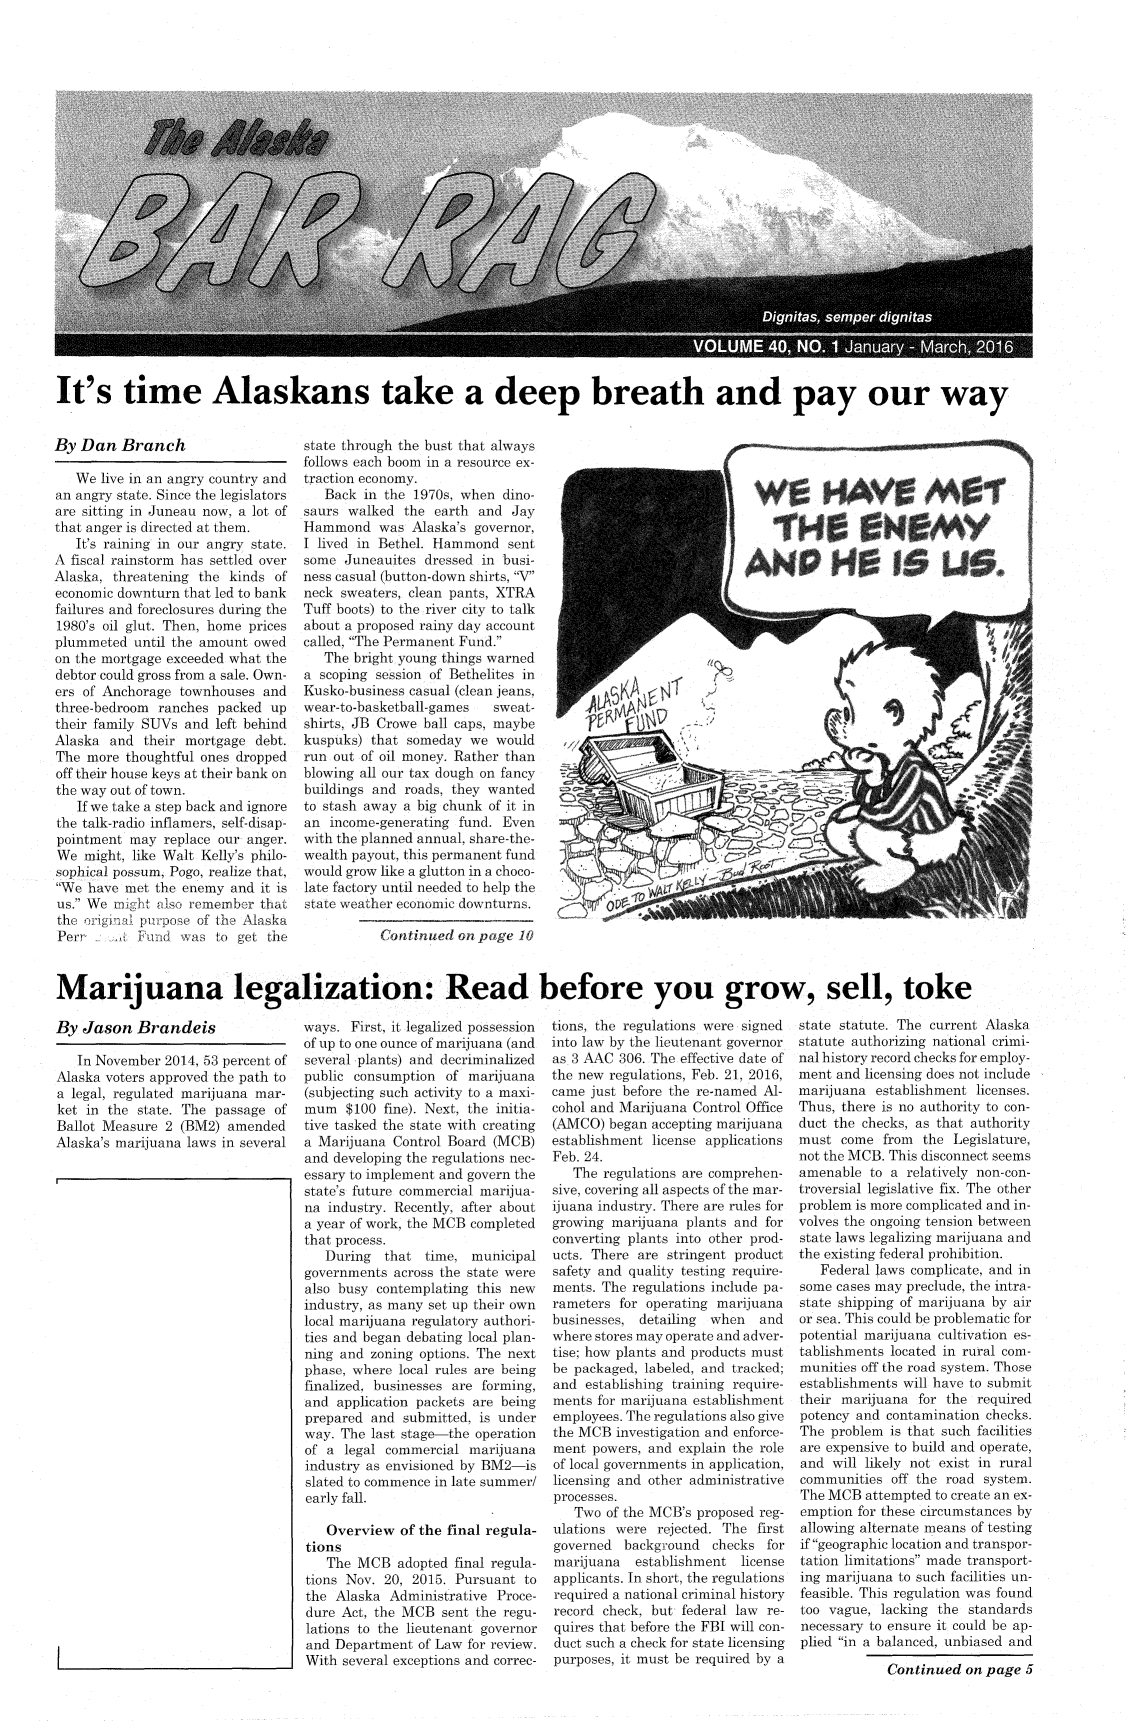 handle is hein.barjournals/askabar0040 and id is 1 raw text is: 
























It's time Alaskans take a deep breath and pay our way


By  Dan  Branch

   We  live in an angry country and
an angry state. Since the legislators
are sitting in Juneau now, a lot of
that anger is directed at them.
   It's raining in our angry state.
A fiscal rainstorm has settled over
Alaska, threatening the  kinds of
economic downturn that led to bank
failures and foreclosures during the
1980's oil glut. Then, home prices
plummeted  until the amount owed
on the mortgage exceeded what the
debtor could gross from a sale. Own-
ers of Anchorage  townhouses  and
three-bedroom  ranches packed  up
their family SUVs and  left behind
Alaska  and  their mortgage debt.
The  more thoughtful ones dropped
off their house keys at their bank on
the way out of town.
   If we take a step back and ignore
the talk-radio inflamers, self-disap-
pointment  may replace our anger.
We  might, like Walt Kelly's philo-
sophical possum, Pogo, realize that,
We  have met the enemy  and it is
us. We rmight also remember that
the original purpose of the Alaska
Perr        Fun   was  to get the


state through the bust that always
follows each boom in a resource ex-
traction economy.
   Back  in the 1970s, when dino-
saurs walked  the  earth and Jay
Hammond was Alaska's governor,
I lived in Bethel. Hammond   sent
some  Juneauites dressed in busi-
ness casual (button-down shirts, V
neck sweaters, clean pants, XTRA
Tuff boots) to the river city to talk
about a proposed rainy day account
called, The Permanent Fund.
   The bright young things warned
a scoping session of Bethelites in
Kusko-business casual (clean jeans,
wear-to-basketball-games   sweat-
shirts, JB Crowe ball caps, maybe
kuspuks)  that someday  we would
run out of oil money. Rather than
blowing all our tax dough on fancy
buildings and roads, they wanted
to stash away a big chunk of it in
an  income-generating fund. Even
with the planned annual, share-the-
wealth payout, this permanent fund
would grow like a glutton in a choco-
late factory until needed to help the
state weather economic downturns.


Continued  on page 10


Marijuana legalization: Read'


By  Jason  Brandeis


   In November 2014, 53 percent of
Alaska voters approved the path to
a legal, regulated marijuana mar-
ket in the state. The passage  of
Ballot Measure 2  (BM2) amended
Alaska's marijuana laws in several


ways.  First, it legalized possession
of up to one ounce of marijuana (and
several plants) and decriminalized
public consumption  of marijuana
(subjecting such activity to a maxi-
mum   $100 fine). Next, the initia-
tive tasked the state with creating
a Marijuana  Control Board (MCB)
and developing the regulations nec-
essary to implement and govern the
state's future commercial marijua-
na industry. Recently, after about
a year of work, the MCB completed
that process.
   During  that  time,  municipal
governments  across the state were
also busy contemplating this new
industry, as many set up their own
local marijuana regulatory authori-
ties and began debating local plan-
ning and zoning options. The next
phase, where local rules are being
finalized, businesses are forming,
and  application packets are being
prepared  and submitted, is under
way. The  last stage-the operation
of a  legal commercial marijuana
industry as envisioned by BM2-is
slated to commence in late summer/
early fall.

   Overview   of the final regula-
tions
   The  MCB  adopted final regula-
tions Nov. 20, 2015. Pursuant  to
the  Alaska Administrative Proce-
dure Act, the MCB   sent the regu-
lations to the lieutenant governor
and Department  of Law for review.
With  several exceptions and correc-


I   ~PH~I6U6.


                w~w



















before you grow, sell,

  tions, the regulations were signed state statute.
  into law by the lieutenant governor statute author:
  as 3 AAC 306. The effective date of nal history recc
  the new regulations, Feb. 21, 2016, ment and licen
  came just before the re-named Al-  marijuana est
  cohol and Marijuana Control Office Thus, there is
  (AMCO)  began accepting marijuana  duct the check,
  establishment license applications must  come fro
  Feb. 24.                           not the MCBI
     The regulations are comprehen-  amenable  to a
  sive, covering all aspects of the mar- troversial legis
  ijuana industry. There are rules for problem is mor
  growing marijuana  plants and for  volves the ong
  converting plants into other prod- state laws lega
  ucts. There are stringent product  the existing fec
  safety and quality testing require-   Federal law
  ments. The regulations include pa- some cases ma
  rameters for operating marijuana   state shipping
  businesses, detailing when   and   or sea. This cou
  where stores may operate and adver- potential mari*
  tise; how plants and products must tablishments 1
  be packaged, labeled, and tracked; munities off th
  and  establishing training require- establishments
  ments for marijuana establishment  their marijuan
  employees. The regulations also give potency and c
  the MCB  investigation and enforce- The problem i
  ment  powers, and explain the role are expensive
  of local governments in application, and will likely
  licensing and other administrative communities  c
  processes.                         The MCB  atter
     Two  of the MCB's proposed reg- emption for th
  ulations were  rejected. The first allowing alterr
  governed  background   checks for  if geographic 1
  marijuana   establishment  license tation limitati
  applicants. In short, the regulations  ing marijuana
  required a national criminal history feasible. This
  record check, but federal law re-  too vague, 1a
  quires that before the FBI will con- necessary to e
  duct such a check for state licensing  plied in a bah
  purposes, it must be required by ary


C


toke


The  current Alaska
izing national crimi-
rd checks for employ-
sing does not include
ablishment licenses.
no  authority to con-
ks, as that authority
om  the Legislature,
rhis disconnect seems
  relatively non-con-
lative fix. The other
e complicated and in-
oing tension between
lizing marijuana and
deral prohibition.
is complicate, and in
y preclude, the intra-
of marijuana  by air
uld be problematic for
juana cultivation es-
ocated in rural com-
e road system. Those
will have to submit
.na for the required
ontamination checks.
s that such facilities
to build and operate,
y not exist in rural
off the road system.
mpted to create an ex-
ese circumstances by
nate means of testing
ocation and transpor-
ons made transport-
to such facilities un-
regulation was found
cking the standards
nsure it could be ap-
anced, unbiased and

ontinued  on page 5


